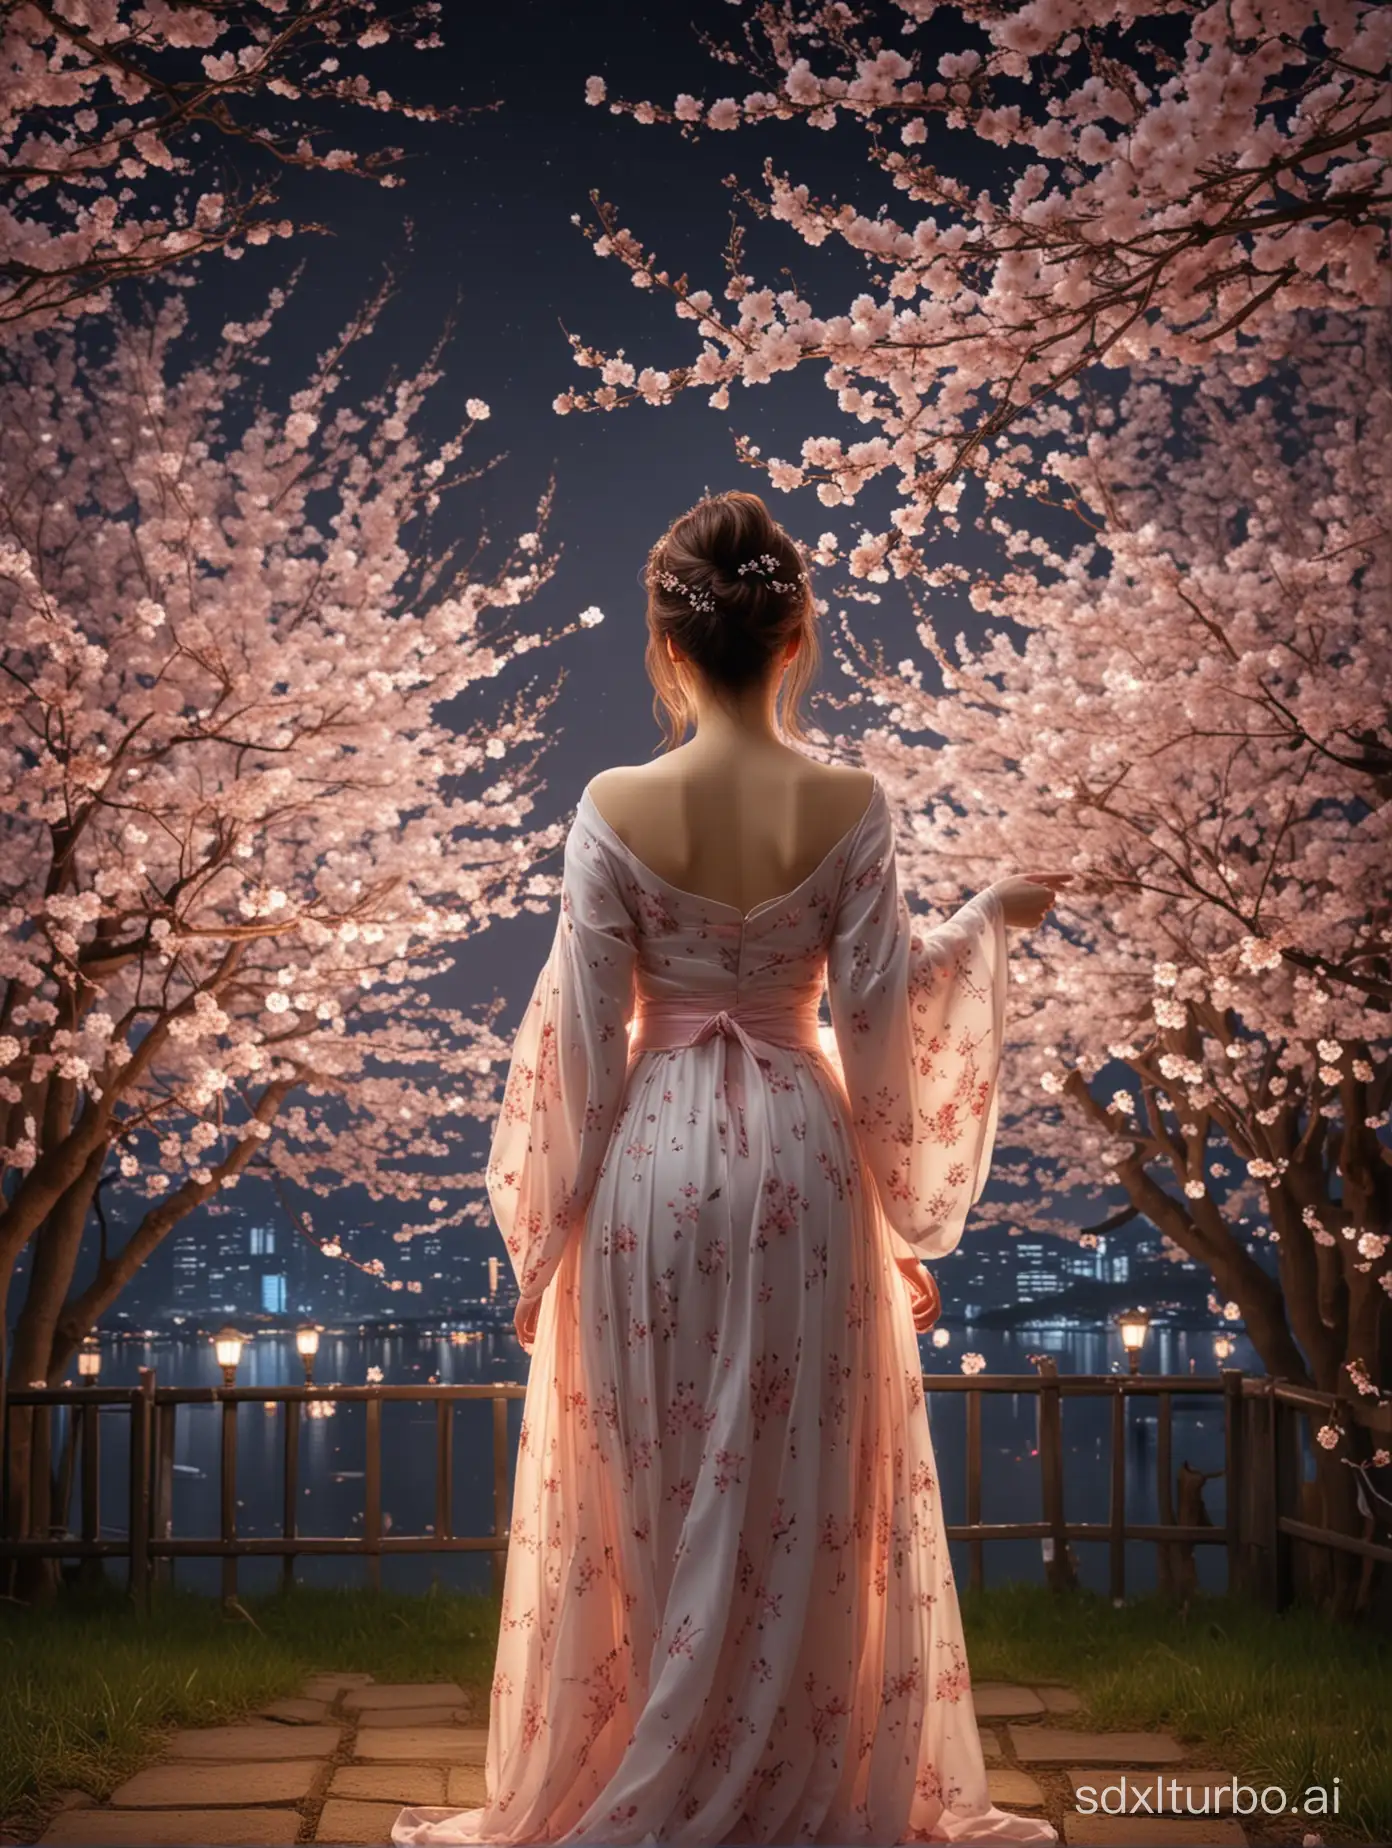 Masterpiece, top quality, ultra delicate, real, night cherry blossoms 🌸, illumination, the back view of a woman looking up at cherry blossoms